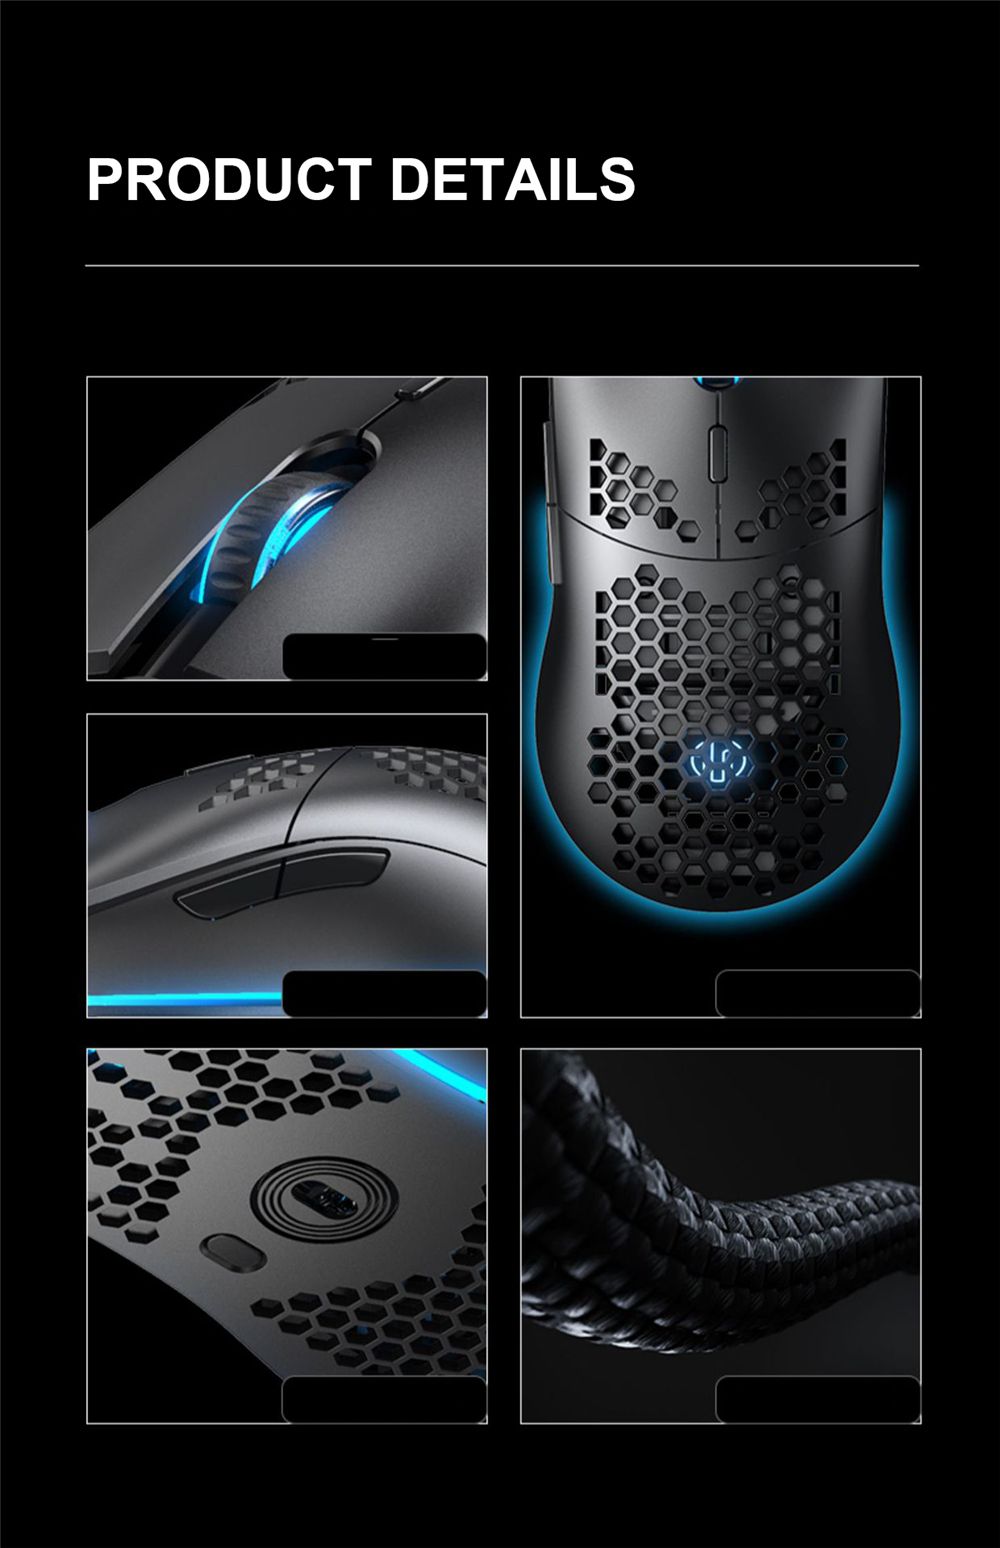 Inphic-W10-Wired-Lightweight-Hollowed-Mouse-Gaming-E-sport-Mouse-Luminous-RGB-for-Pro-Gamers-and-Off-1735595